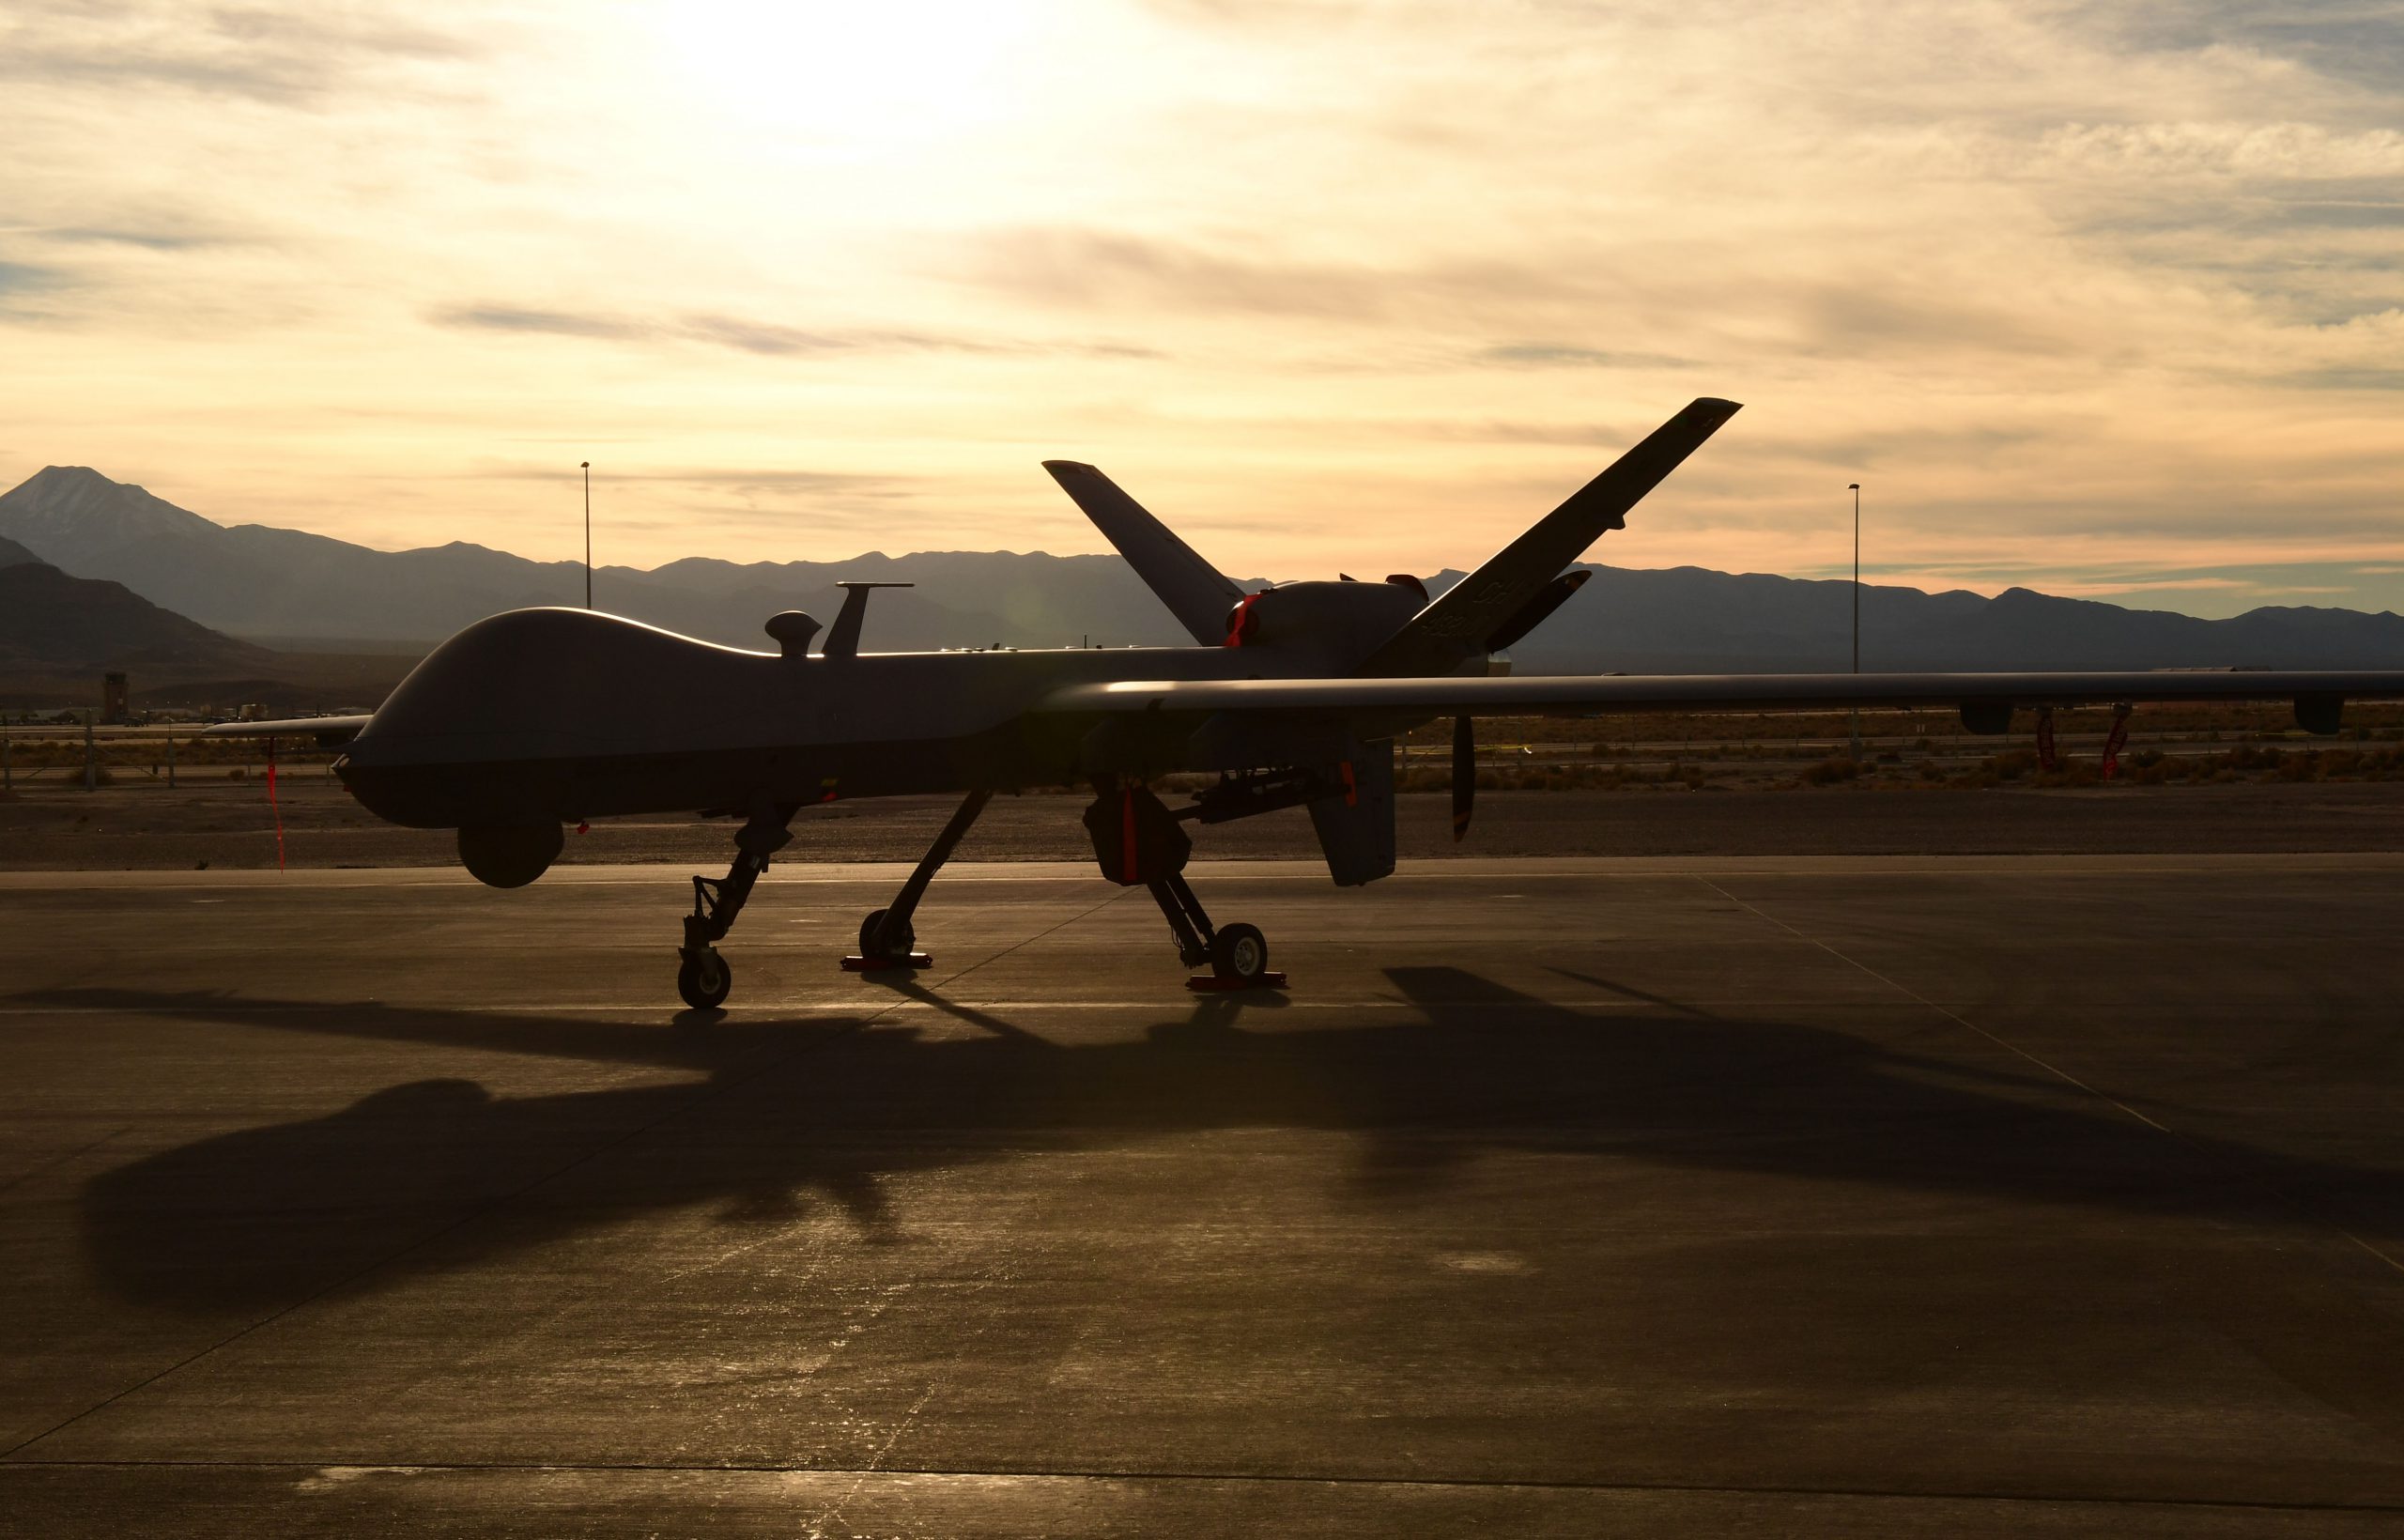 An Air Force MQ-9 Reaper unmanned aircraft awaits maintenance at Creech Air Force Base, Nev., Dec. 8, 2016. The Air Force is set to retire the MQ-1 Predator and transition solely to the more capable MQ-9 in early 2018. Air Force photo by Senior Airman Christian Clausen. -